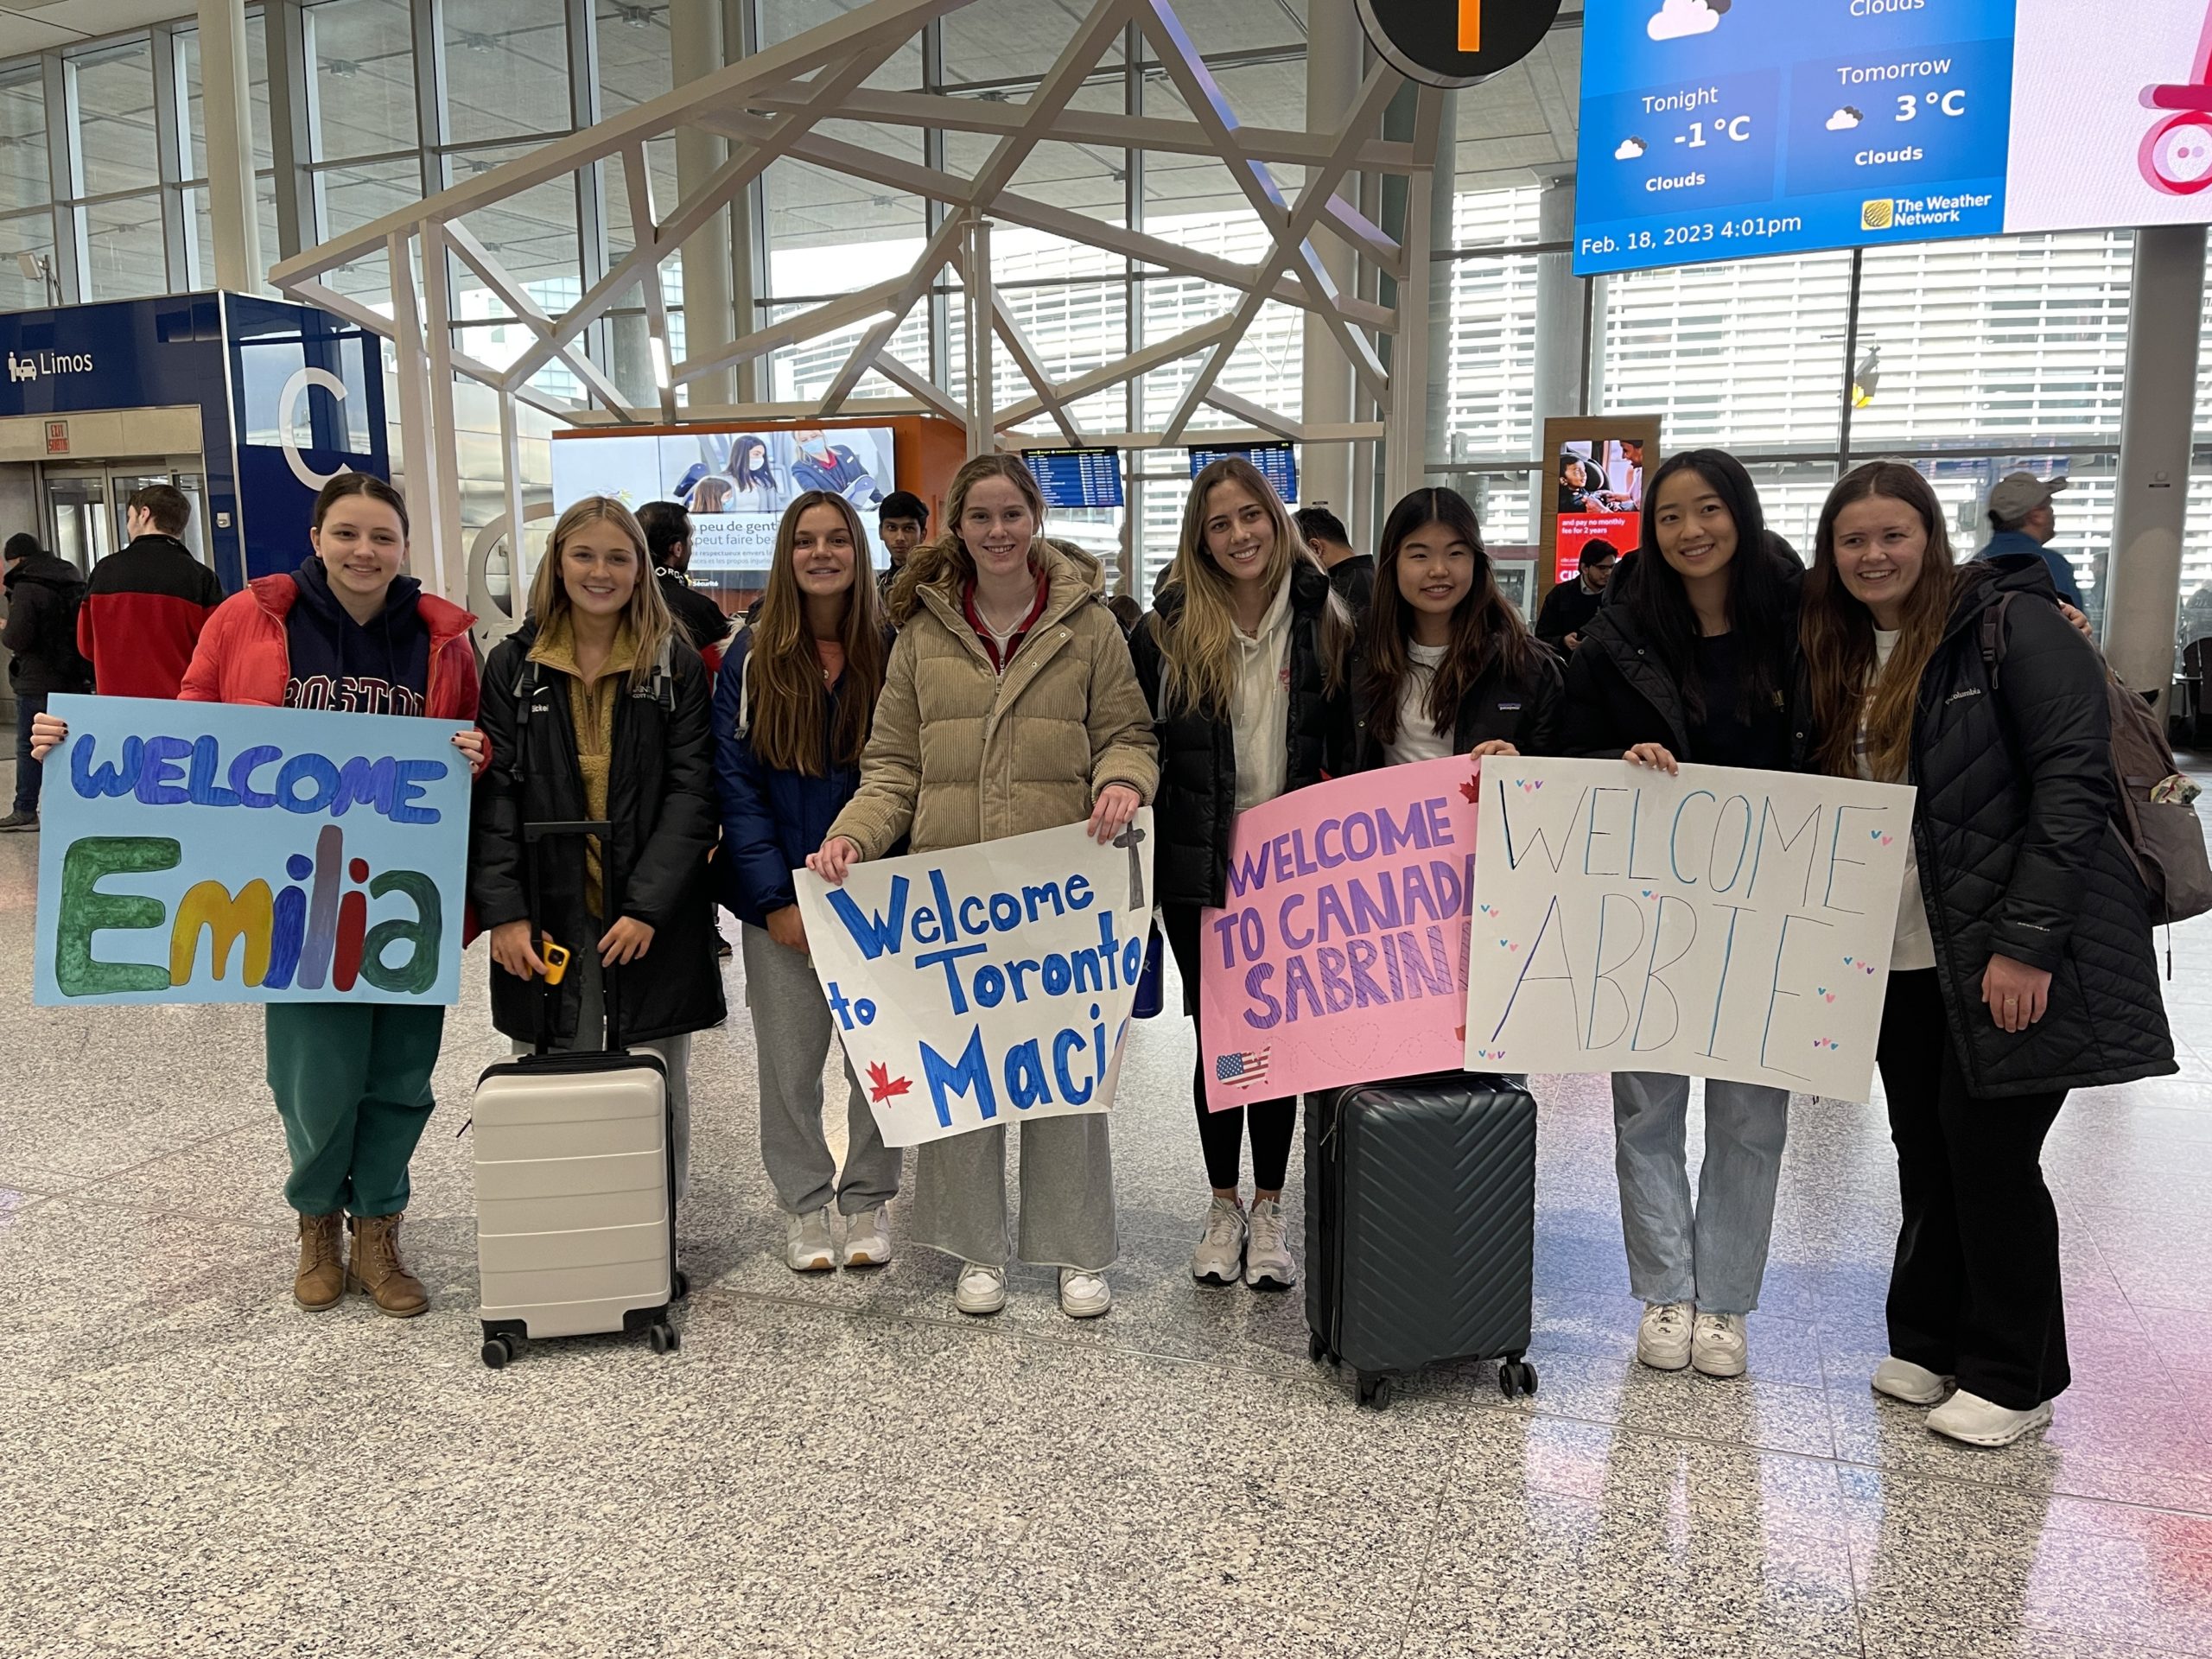 Abbie, Emilia, Sabrina, and Macie being greeted at the airport by their hosts, Nicole, Emily, Sophia, and Charlotte.